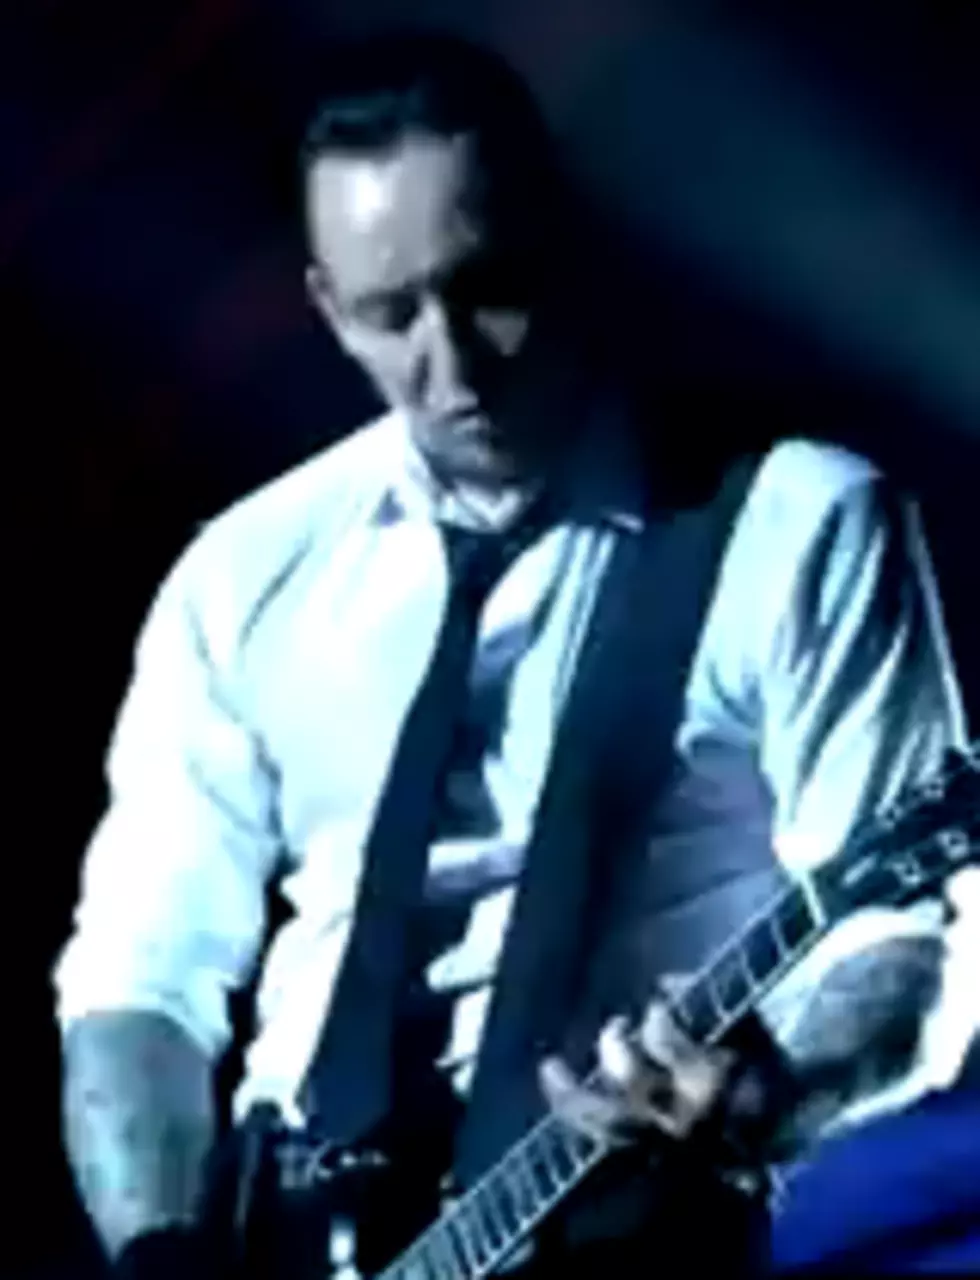 Volbeat ‘Live From Beyond Hell/Above Heaven’ CD/DVD Trailer